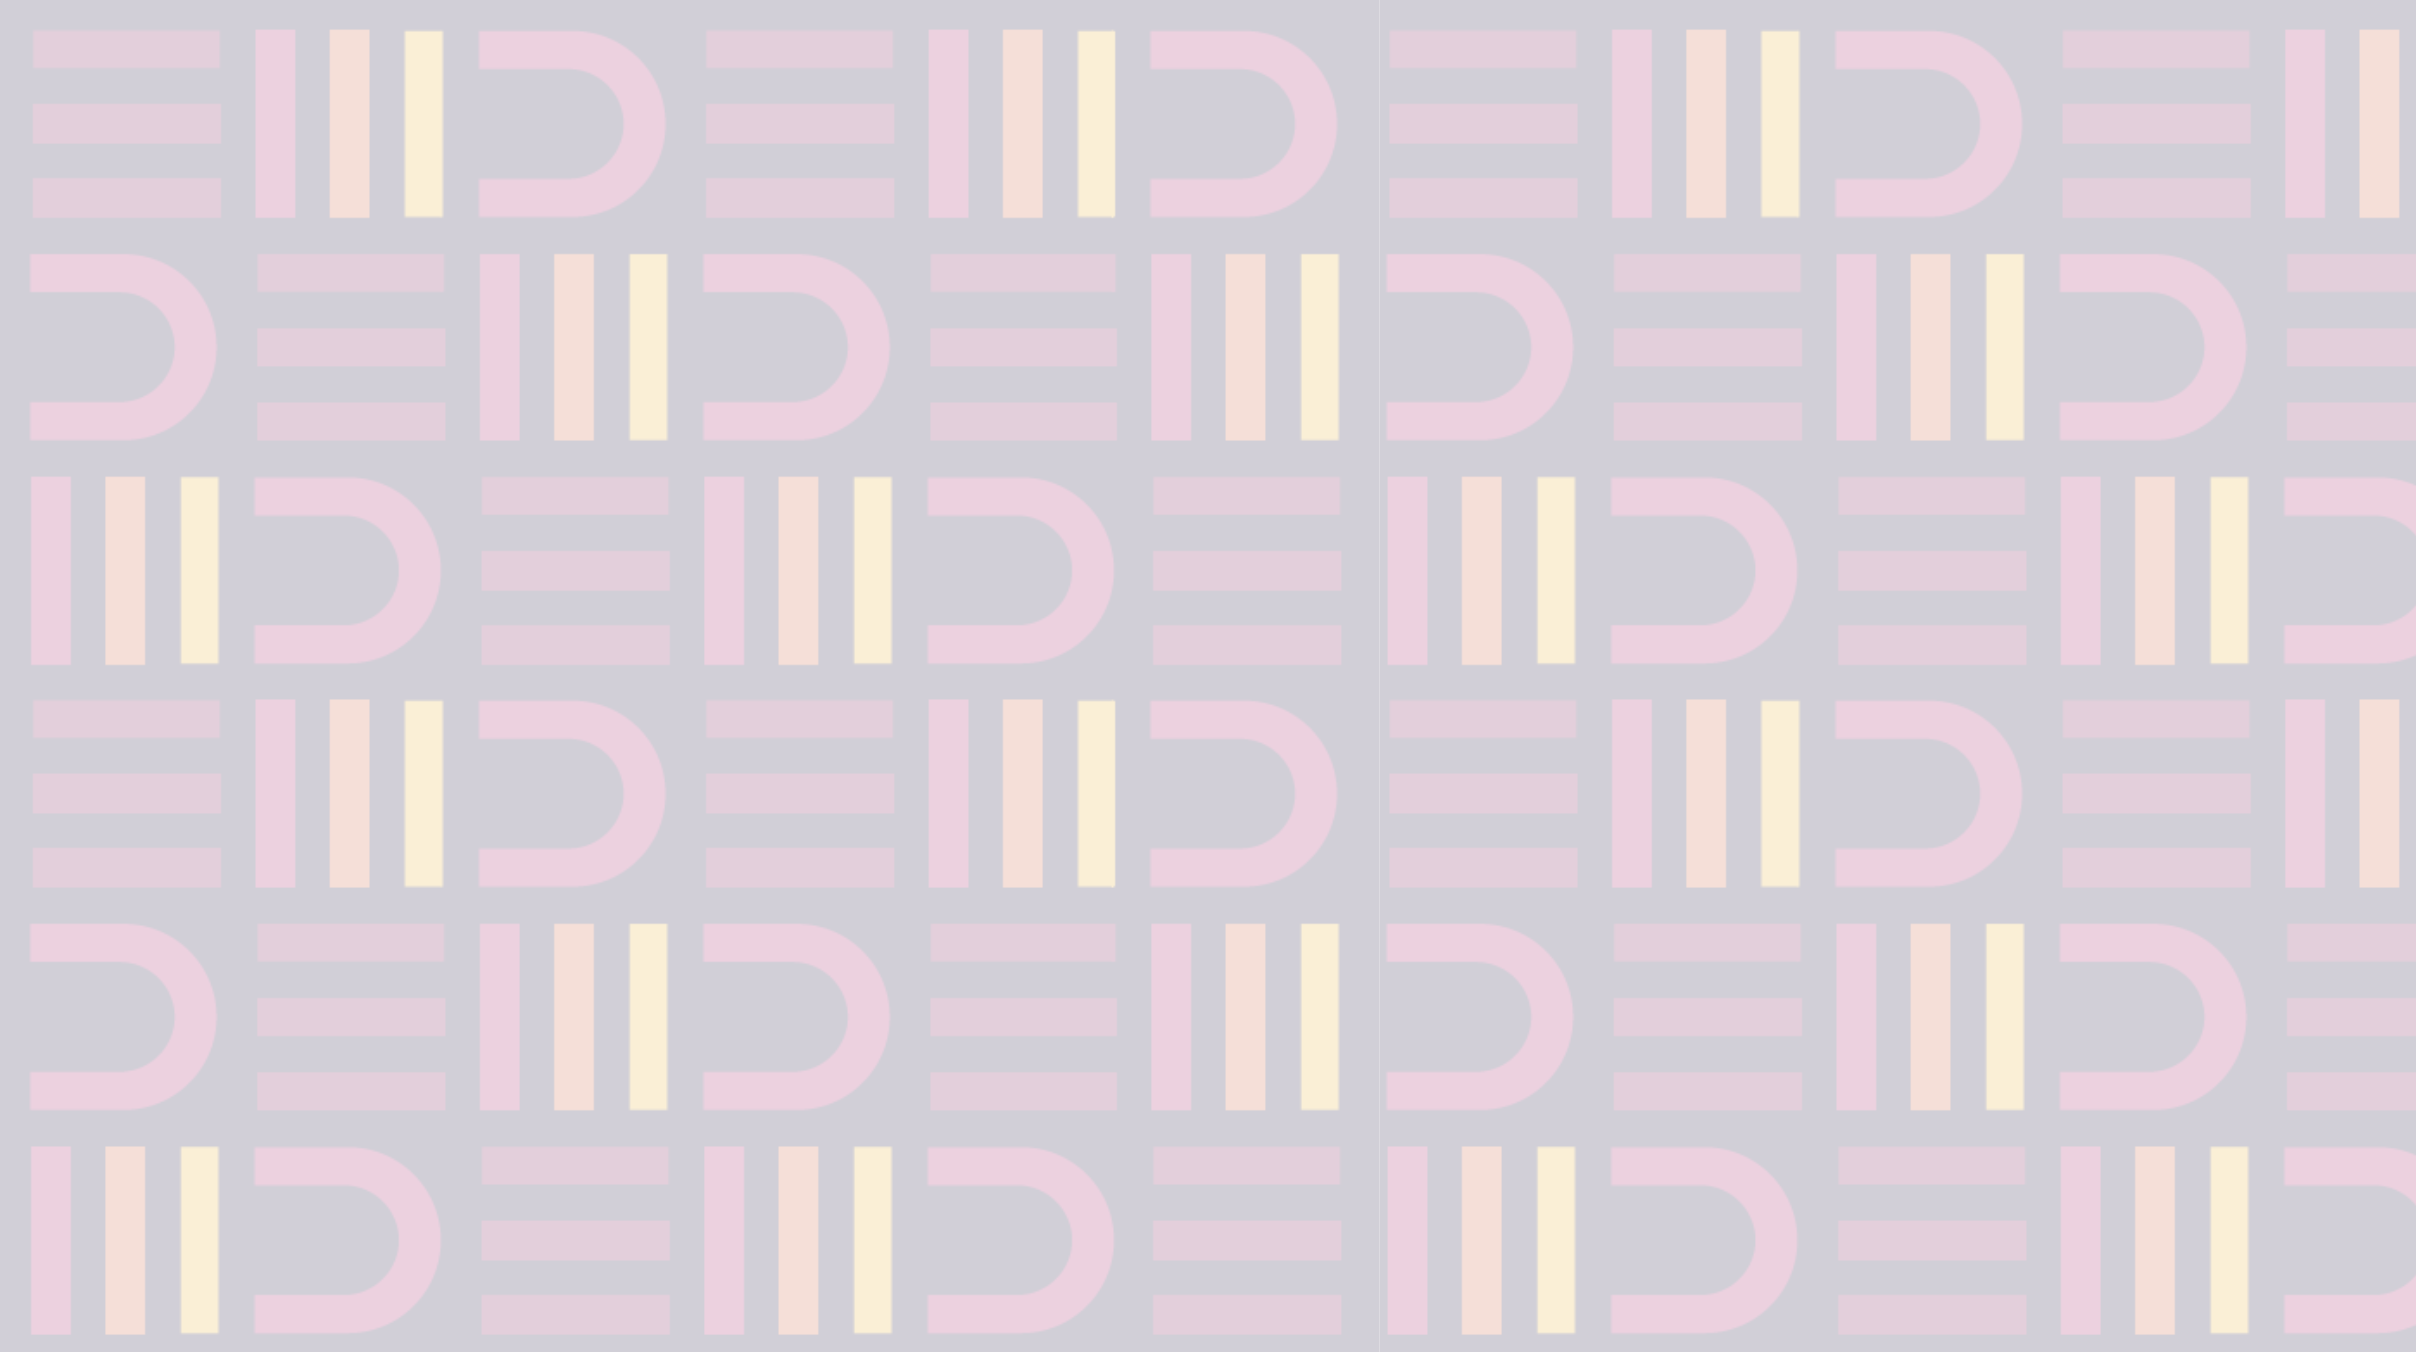 Repeating pattern of EMD logo faded